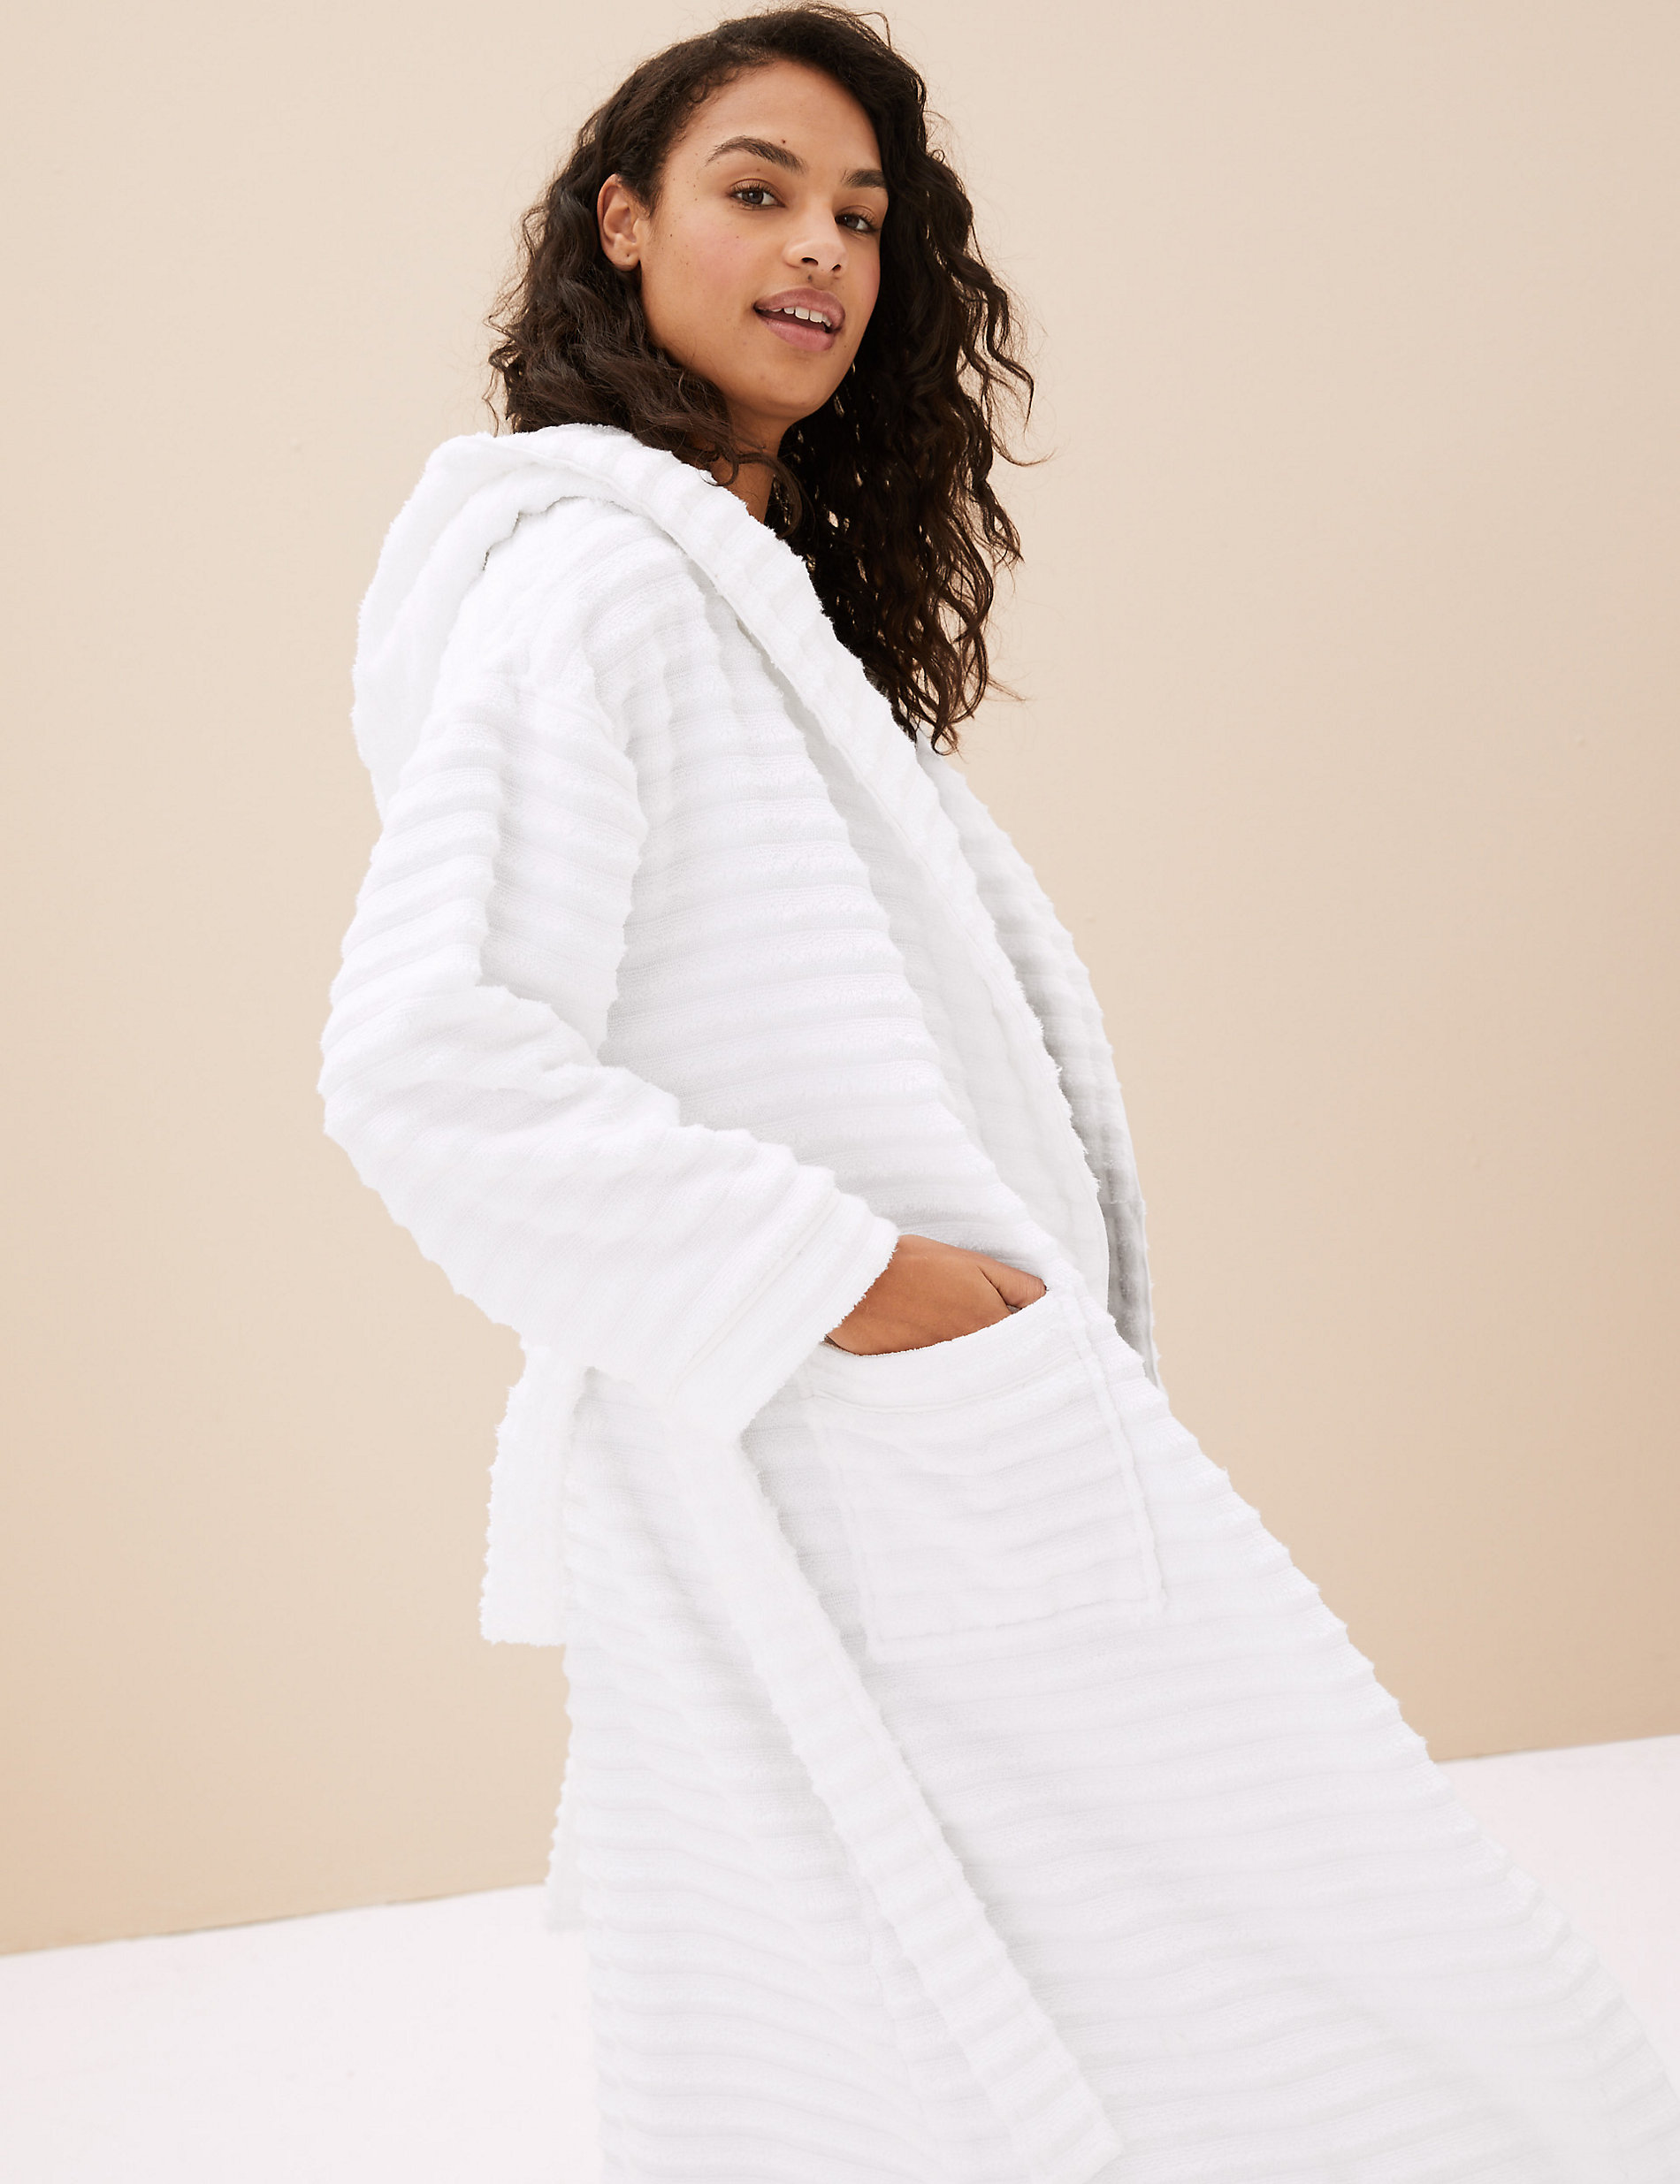 Rib Towelling Dressing Gown